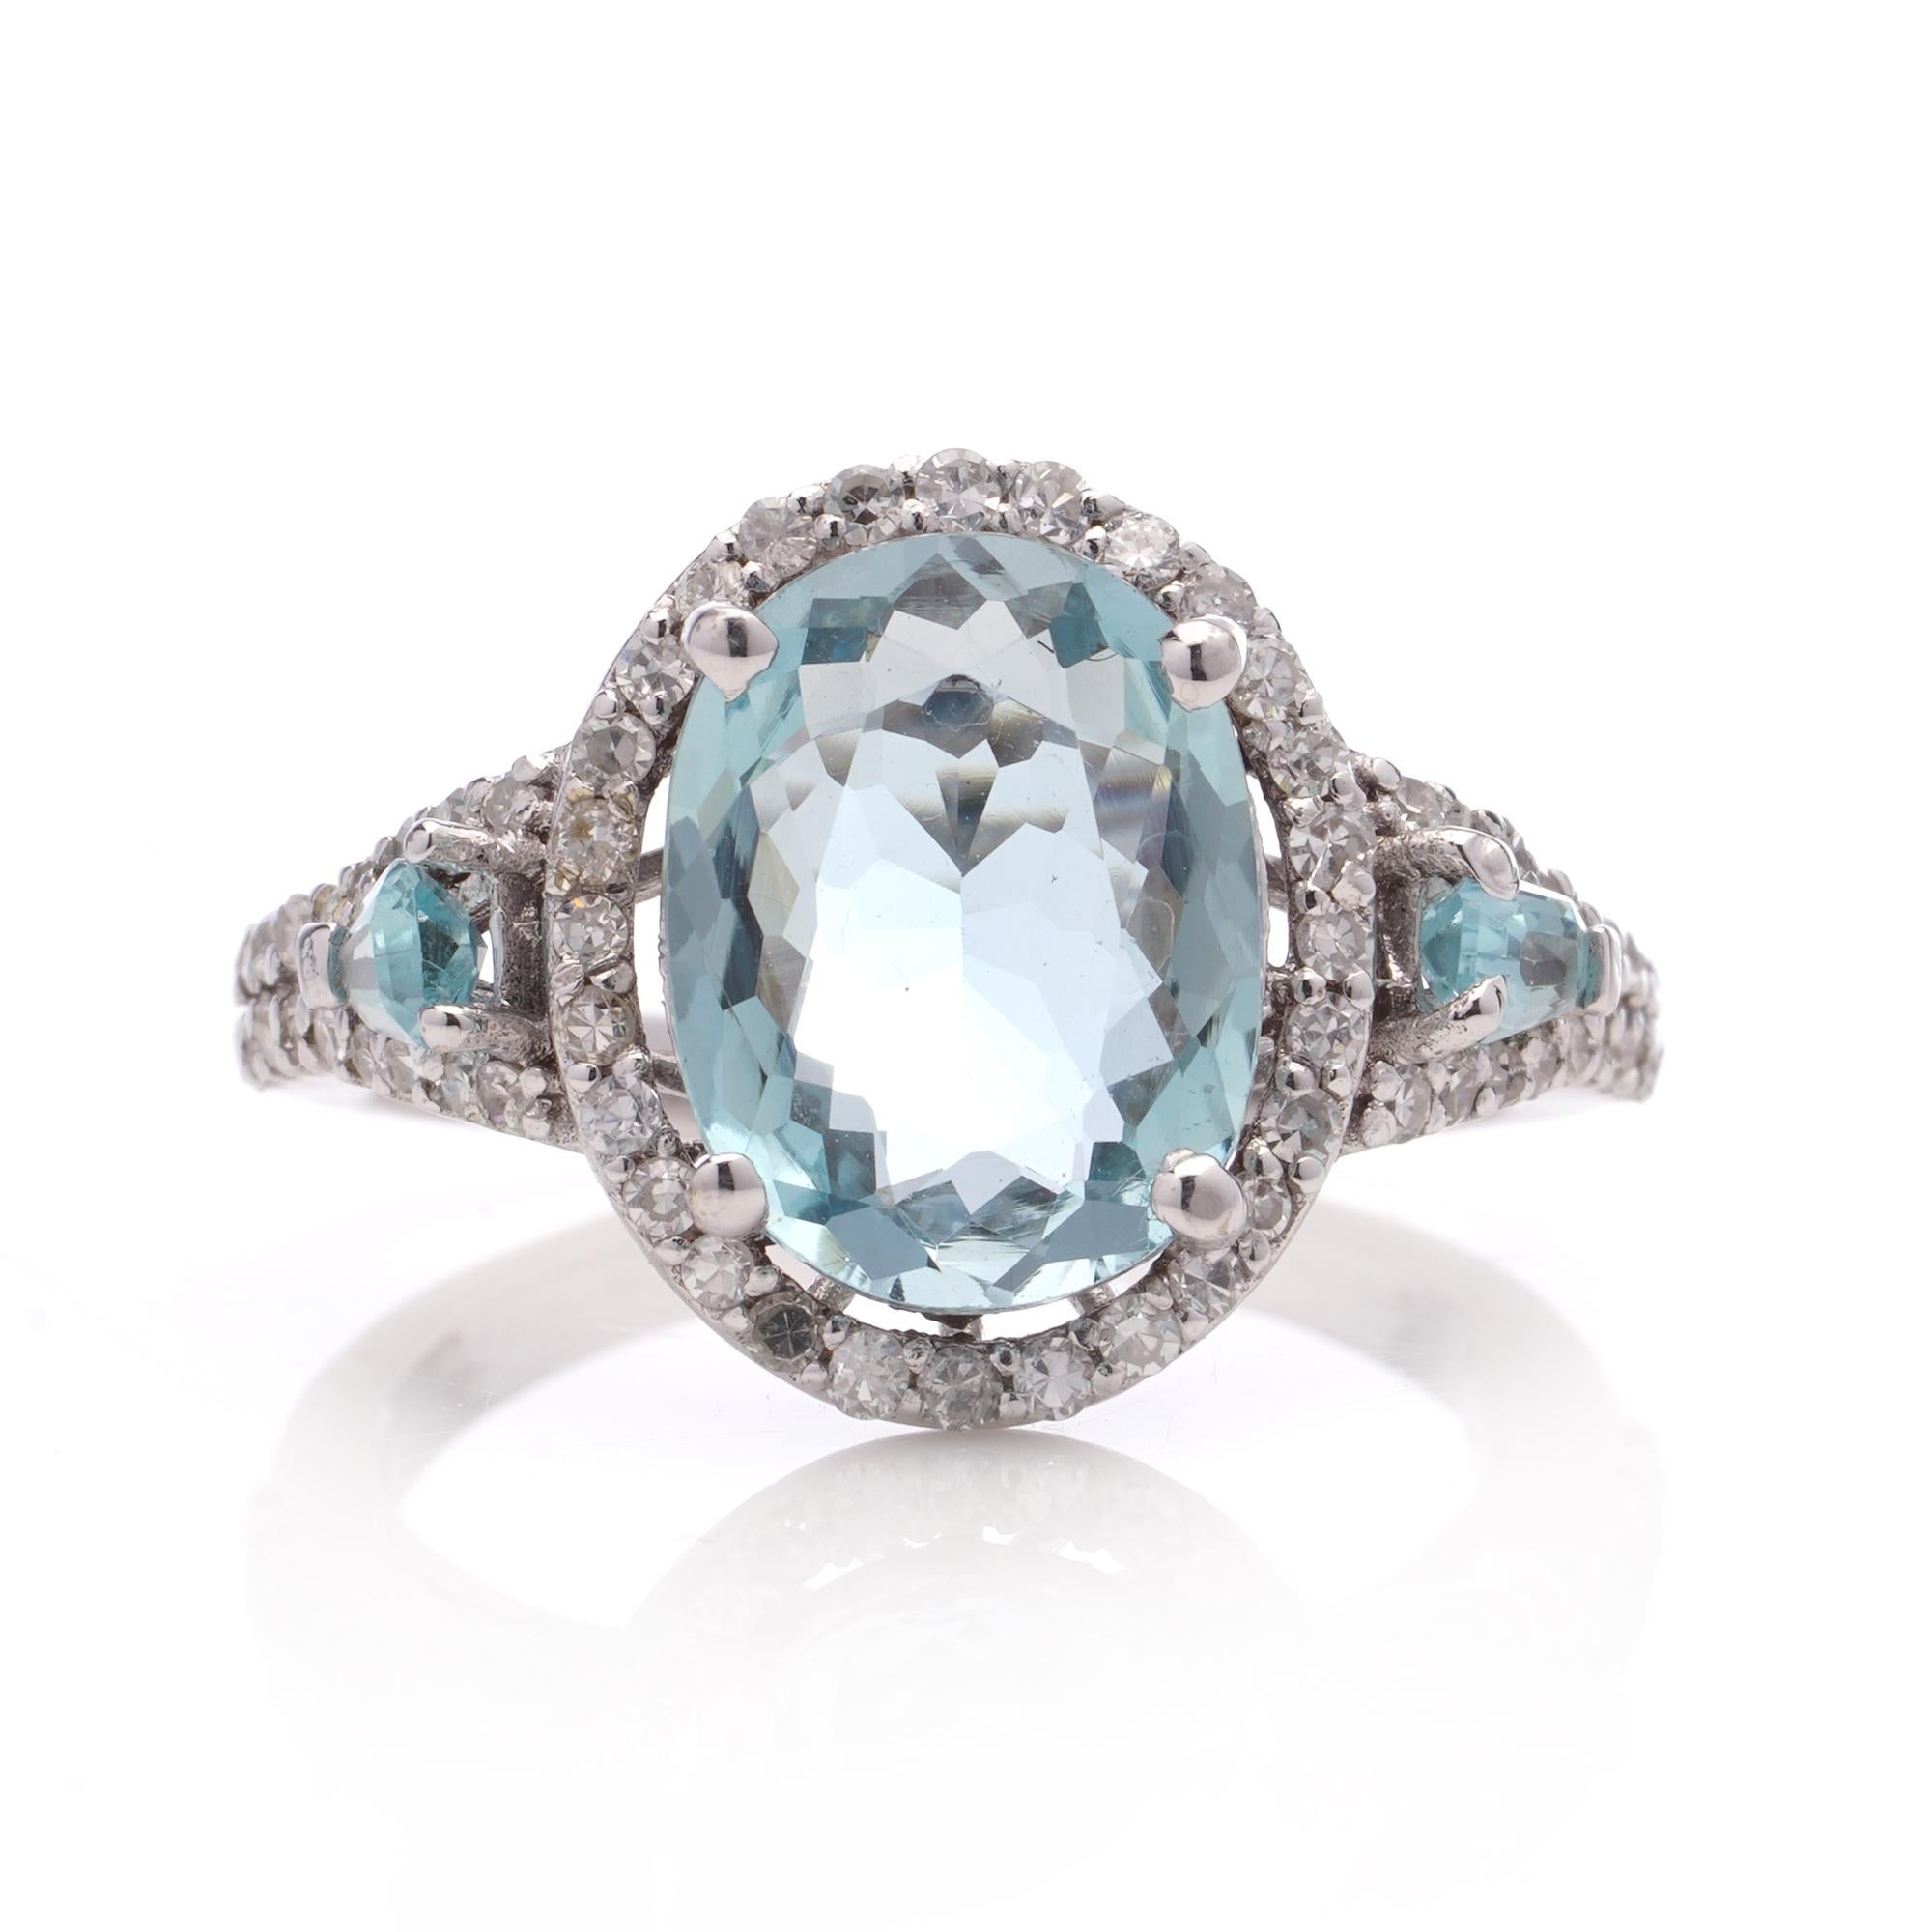 18kt. white gold ladies' 2.90 carats Aquamarine cluster ring surrounded by 0.56 carats of round brilliant diamonds and accented with two 0.24 carats of tapered baguette-cut aquamarines. 
Made after 2000

Hallmarked with 750 ( 18KT. GOLD )